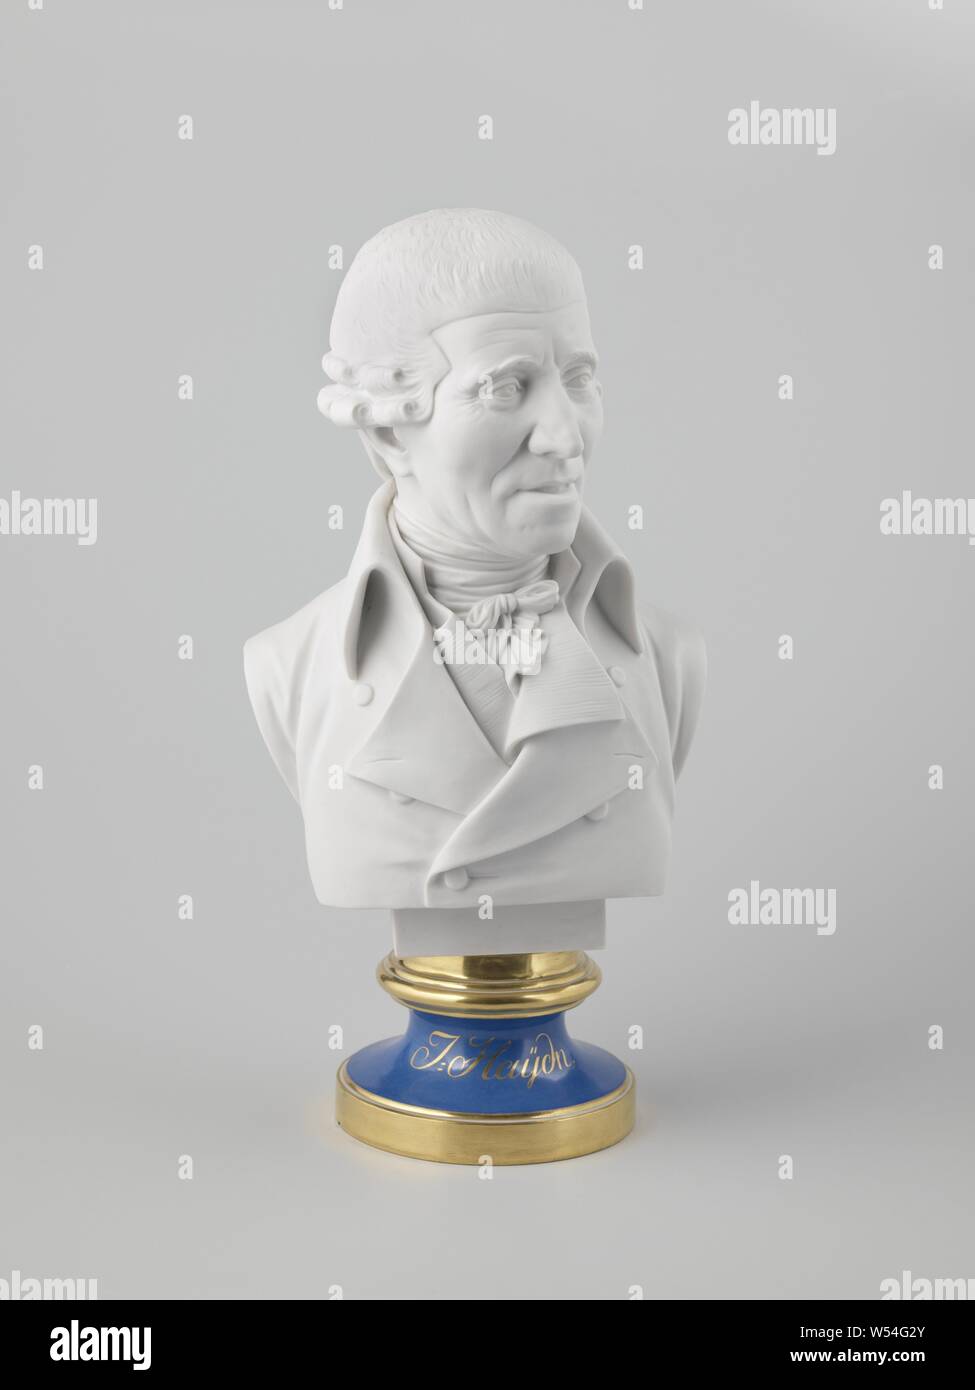 Portrait of Joseph Haydn, Porcelain bust on a round base. The portrait representing Joseph Haydn (1732-1809) is in biscuit and the pedestal is covered with blue and gold on the glaze. Marked on the bottom with the shield, number 59 and year number 805., Kaiserliche Porzellanmanufaktur, Vienna, 1805, porcelain (material), glaze, gold (metal), vitrification, h 40.7 cm × w 20.4 cm × d 14 cm Stock Photo